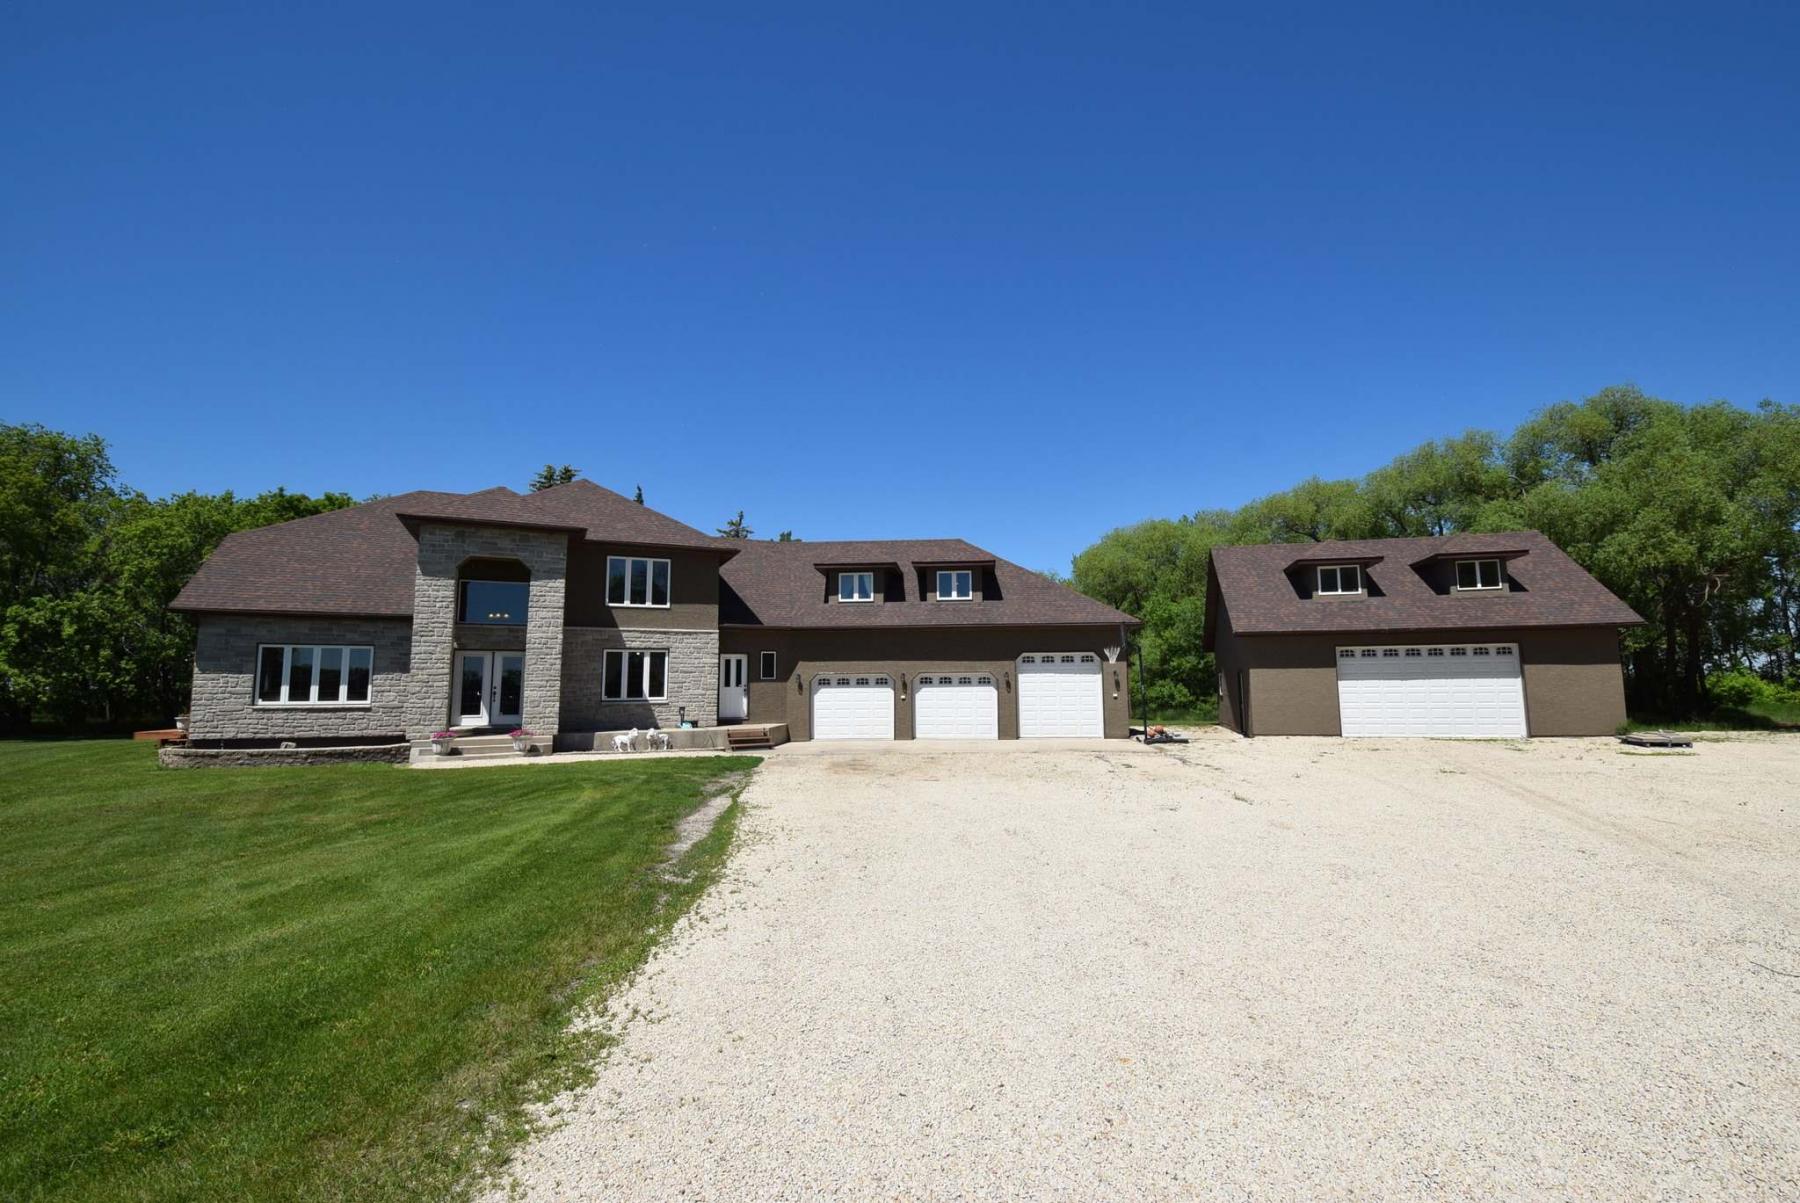 <p>Situated on a gorgeous 11.2-acre lot, the impeccably built two-storey masterpiece offers 3,995 square-feet, plus a detached double garage with a loft area above.</p>